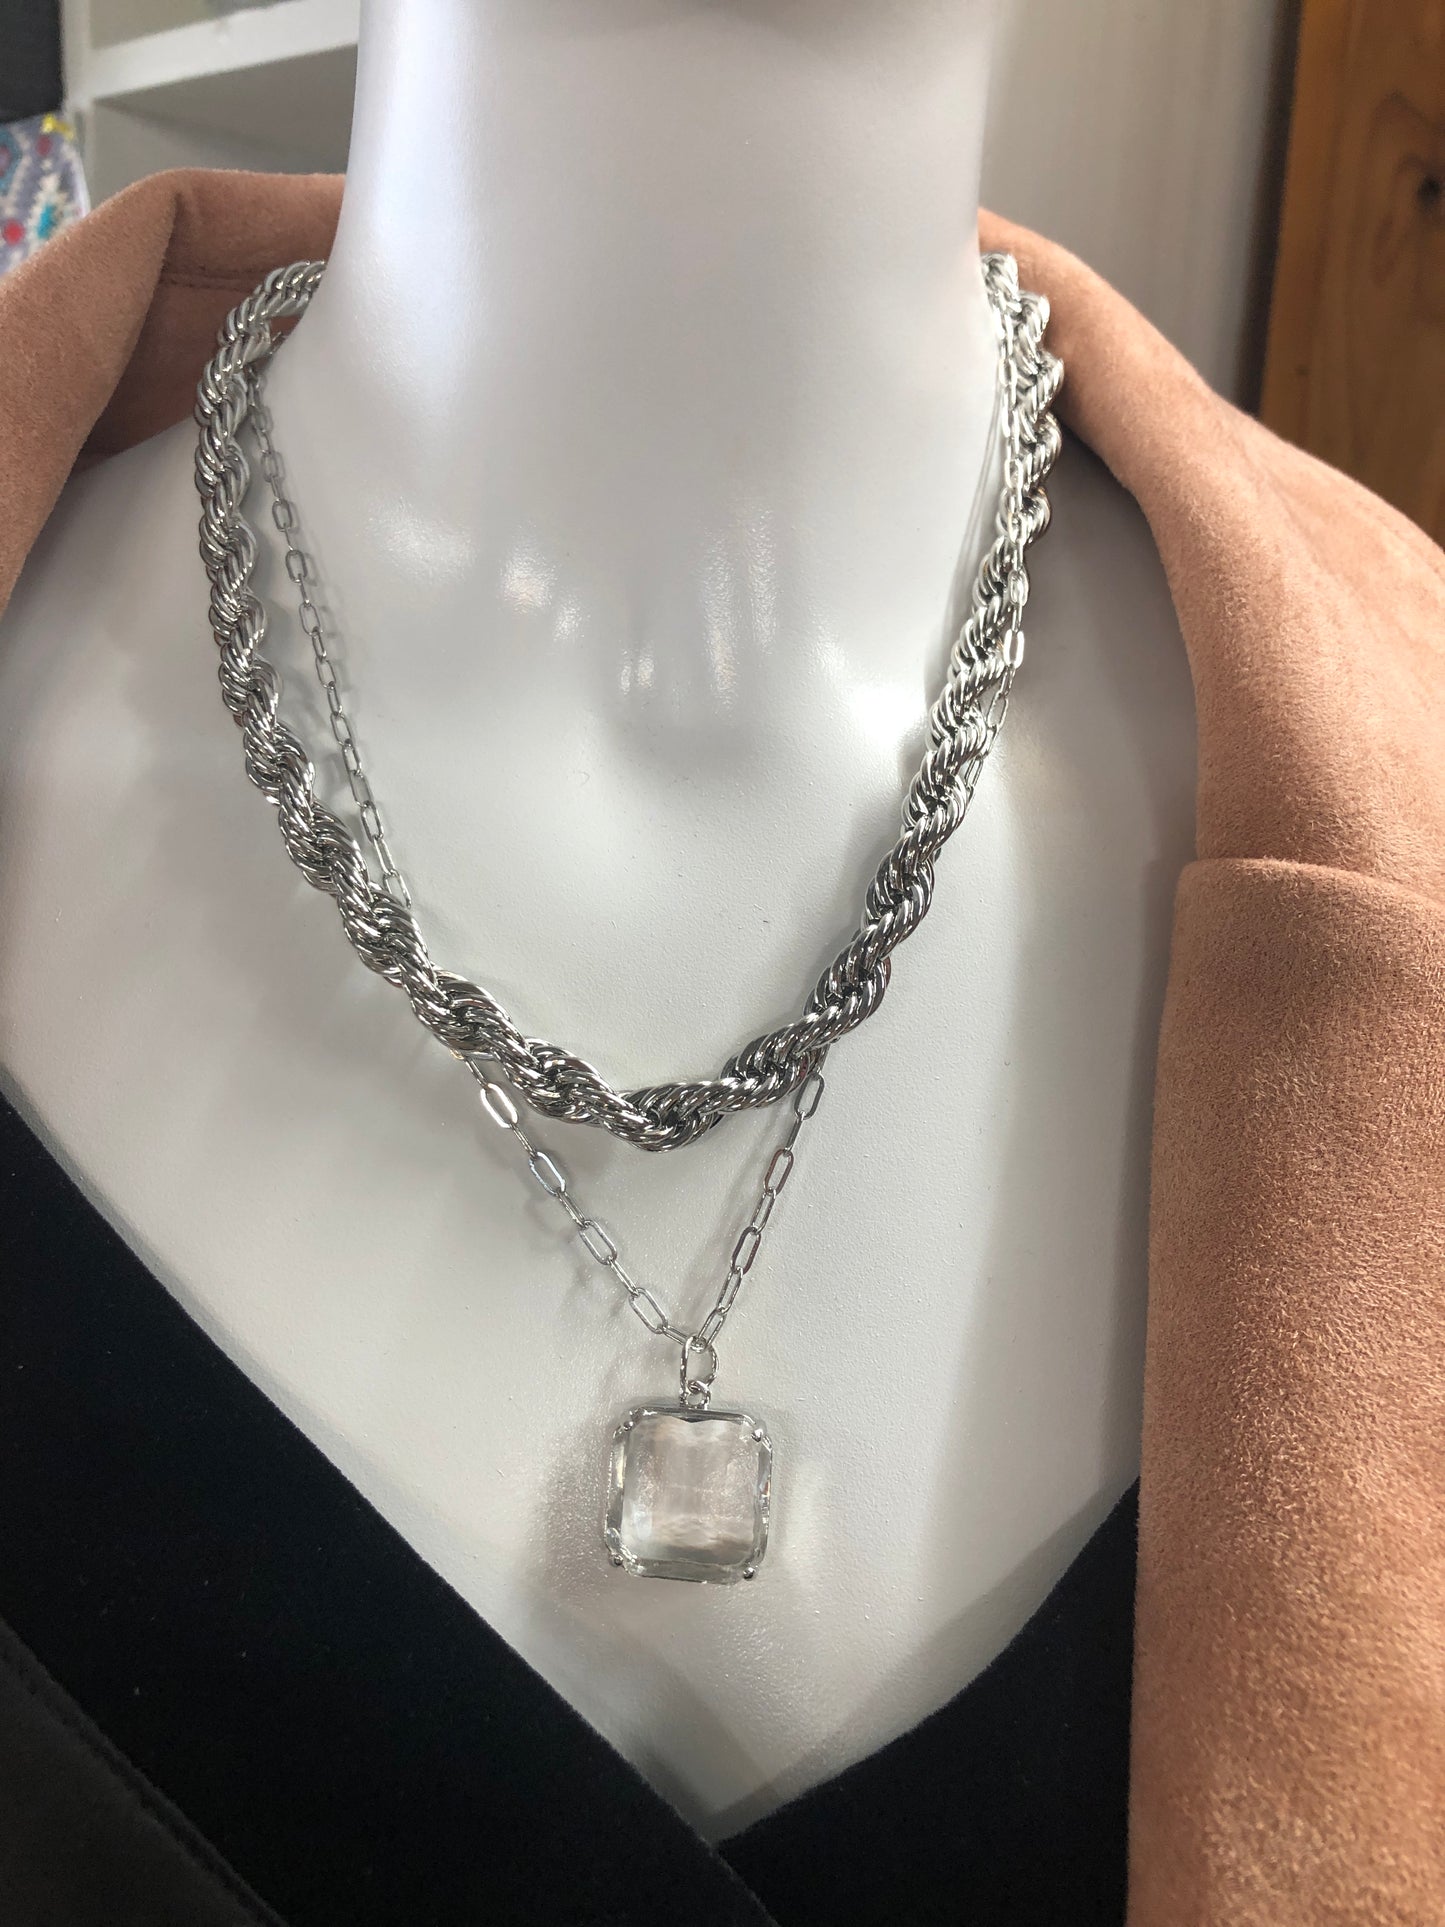 Silver Braided Chain Necklace with Drop Crystal